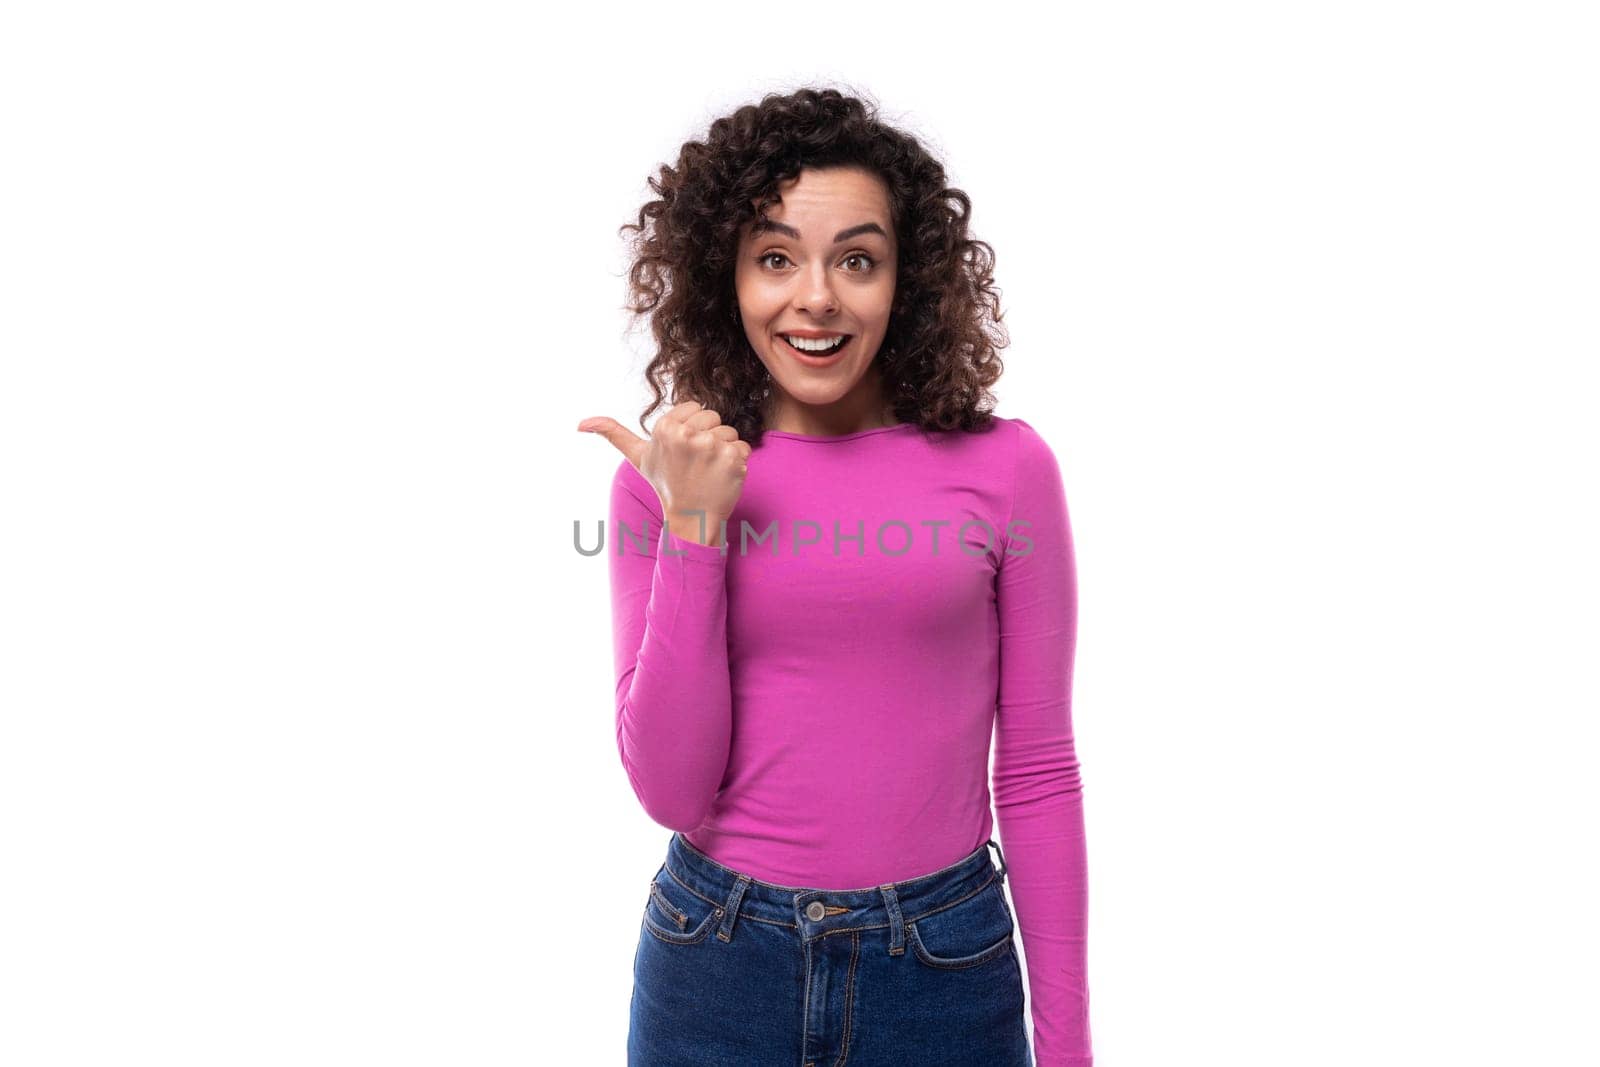 young smiling leader woman with curly black hair on white background with copy space by TRMK